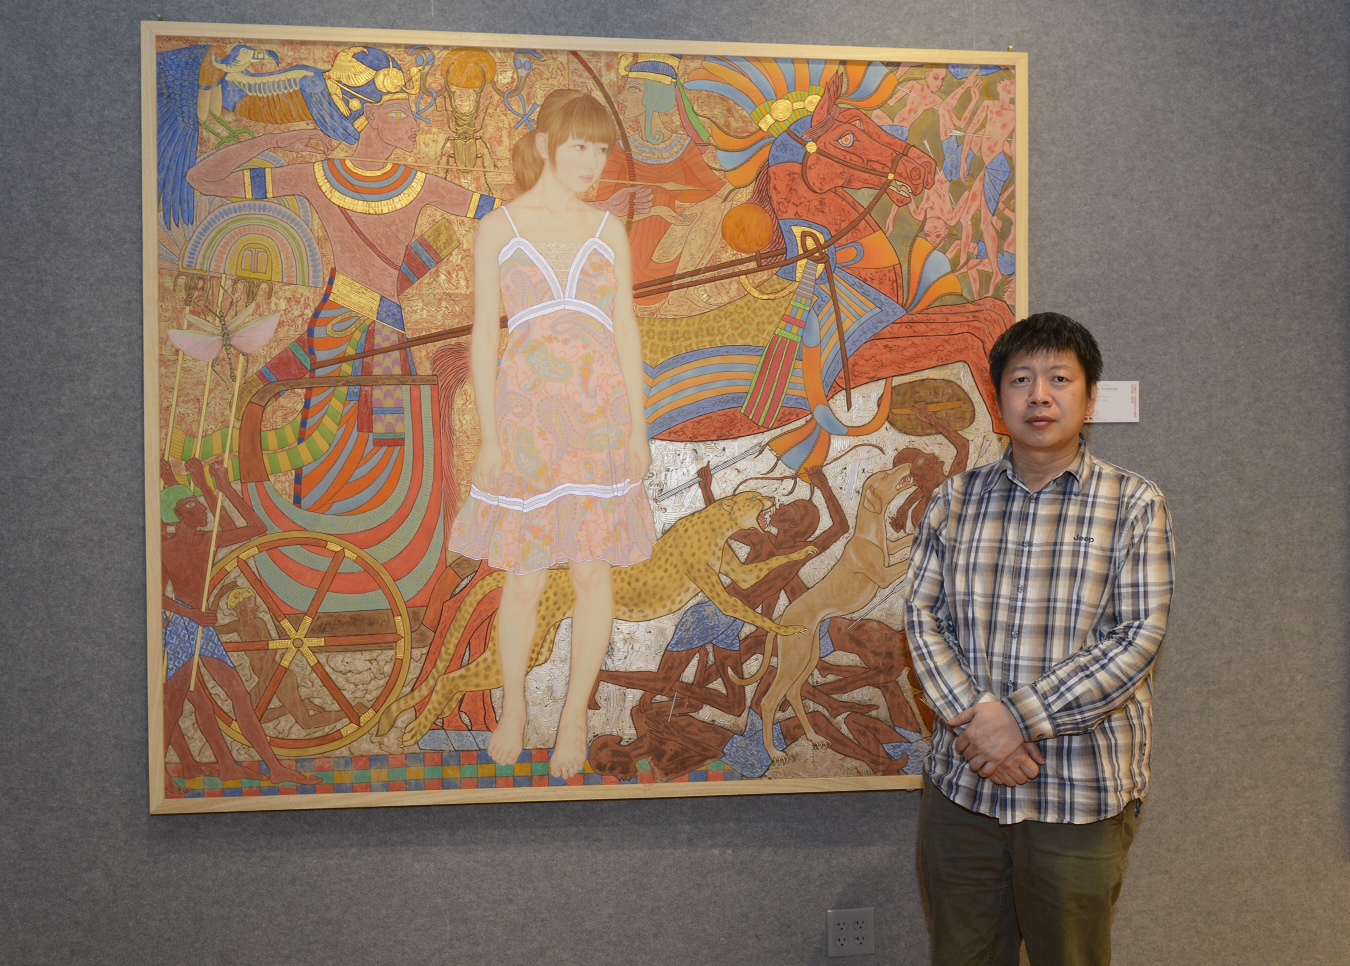 Artist Jin Rui and his painting "The Battlefield"